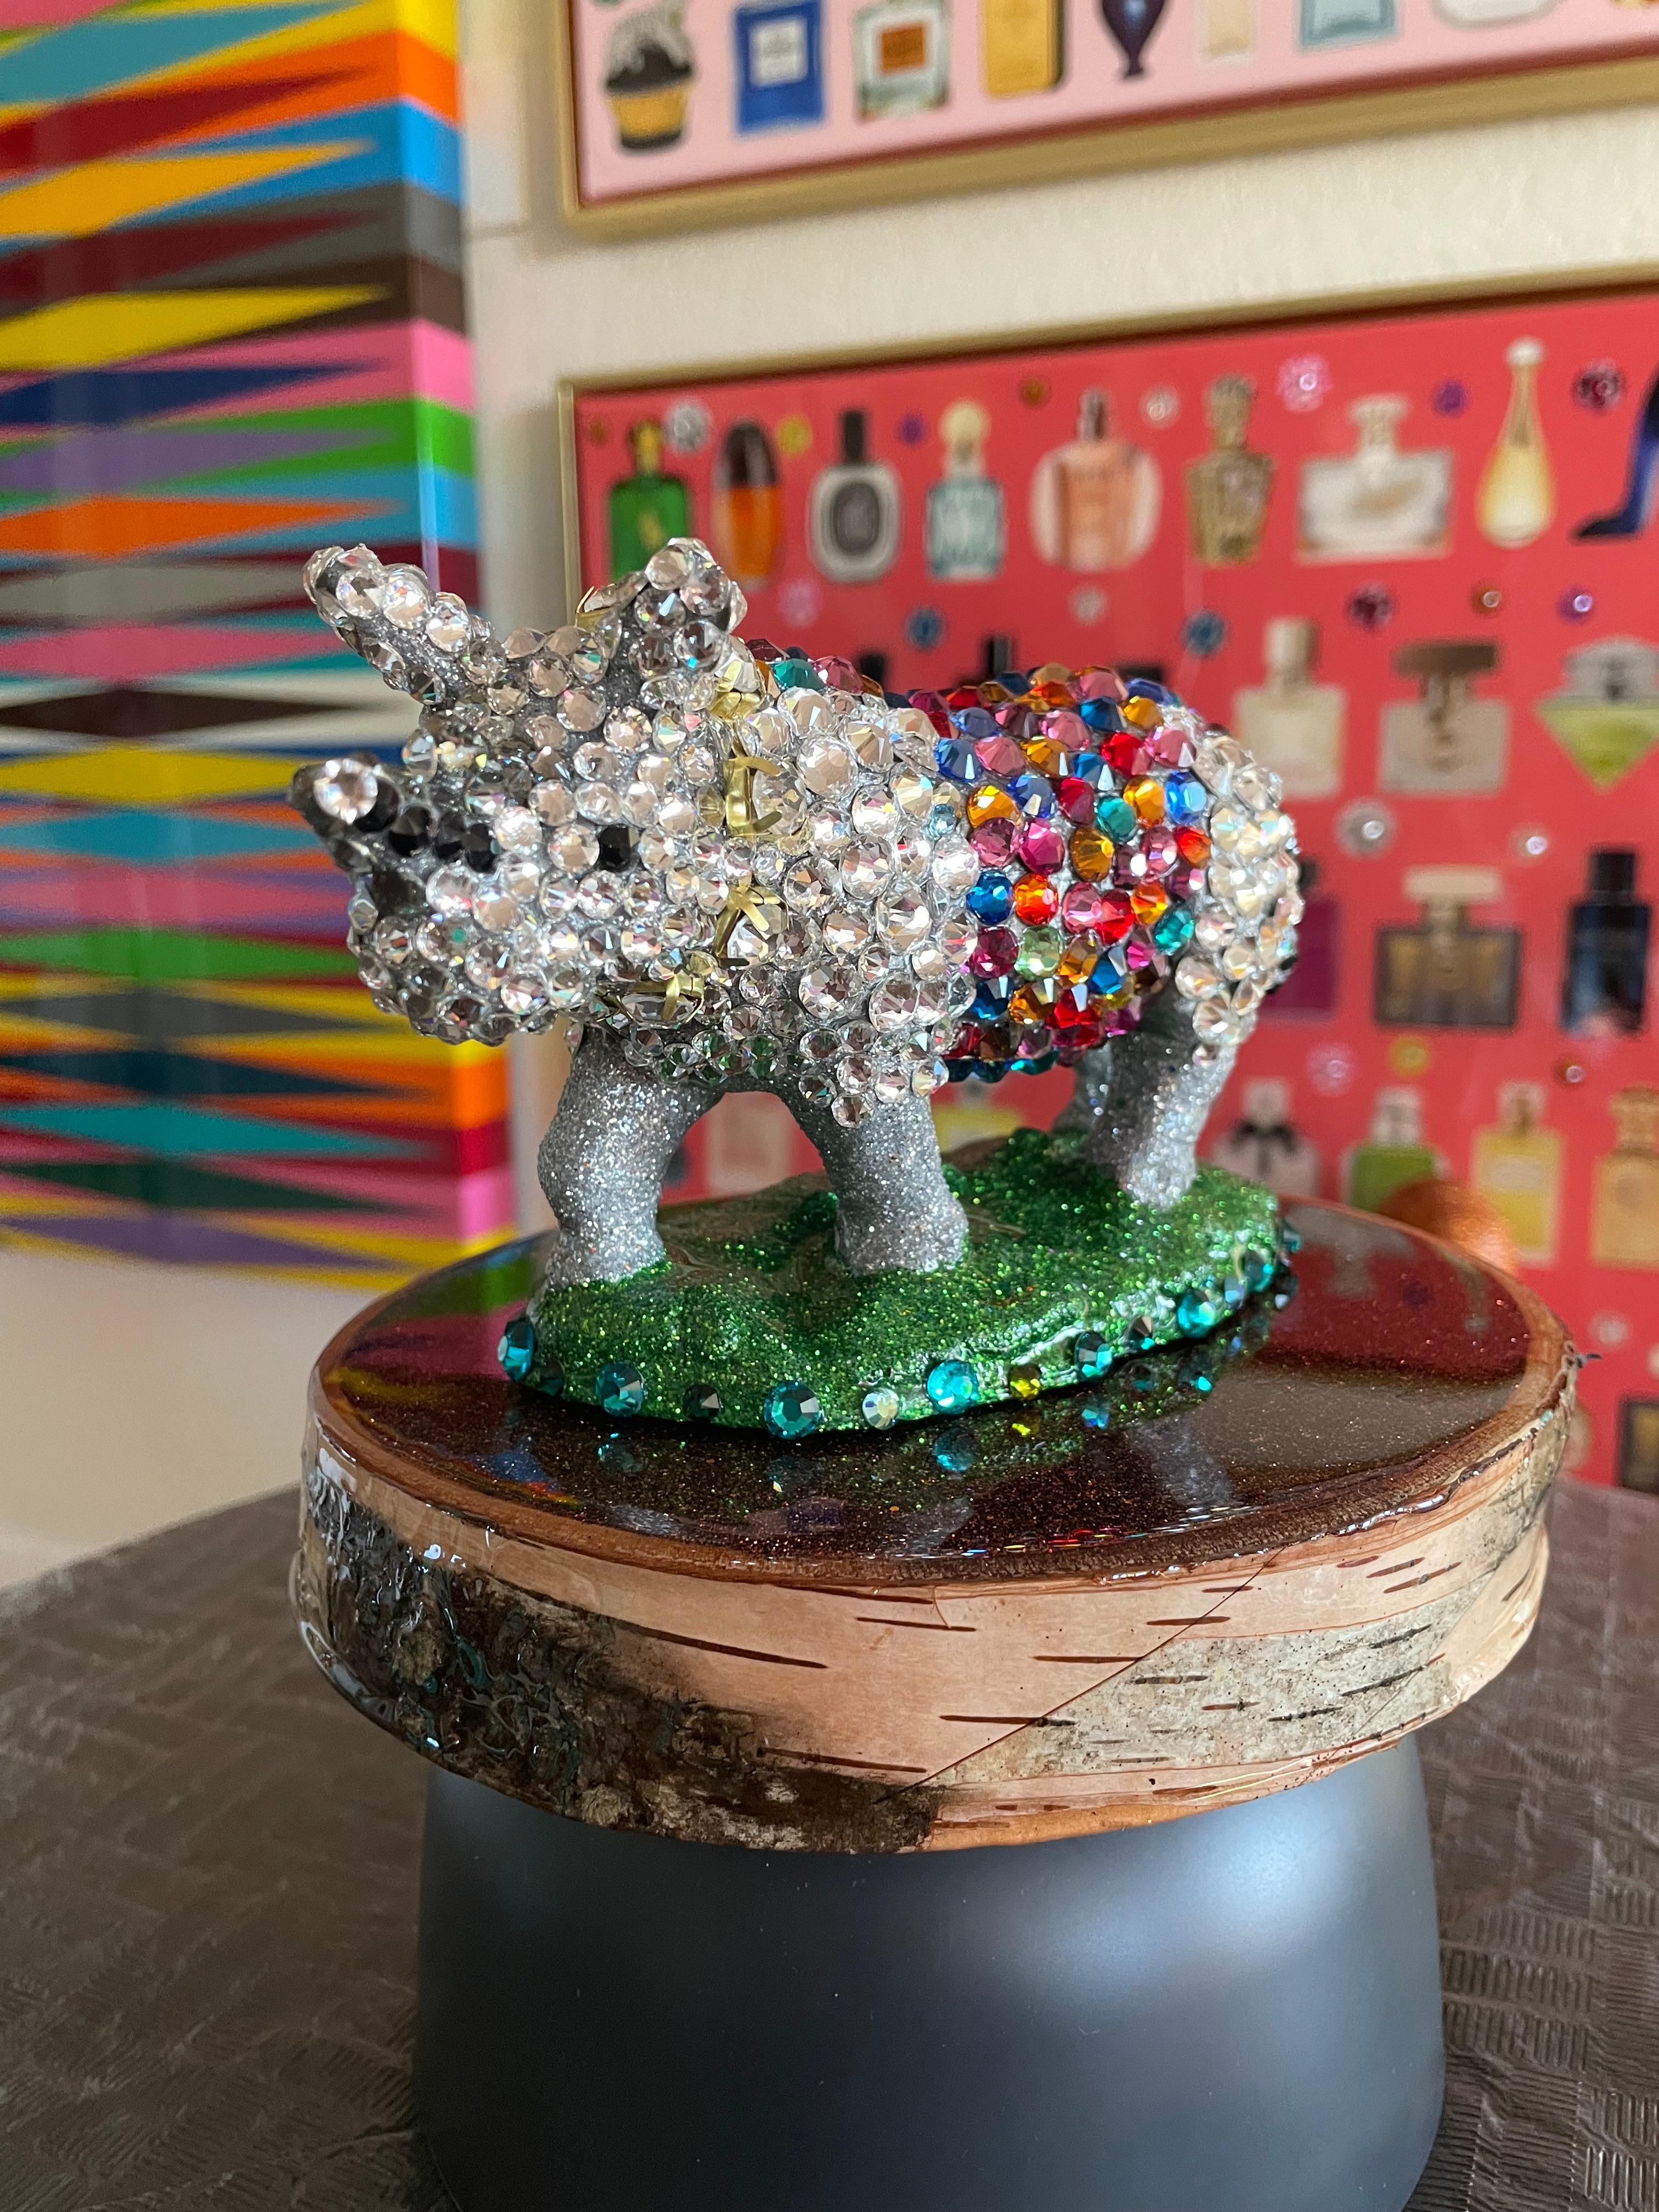 >>LIMITED TIME SALE<<

ONE of a kind RESIN Rino sculpture encrusted with genuine Swarovski crystals.

**SIZE IS WITH THE CUSTOM MADE WOOD BASE**

This is an homage to the colorful Africa.

The piece has a customized glittered wood base covered with